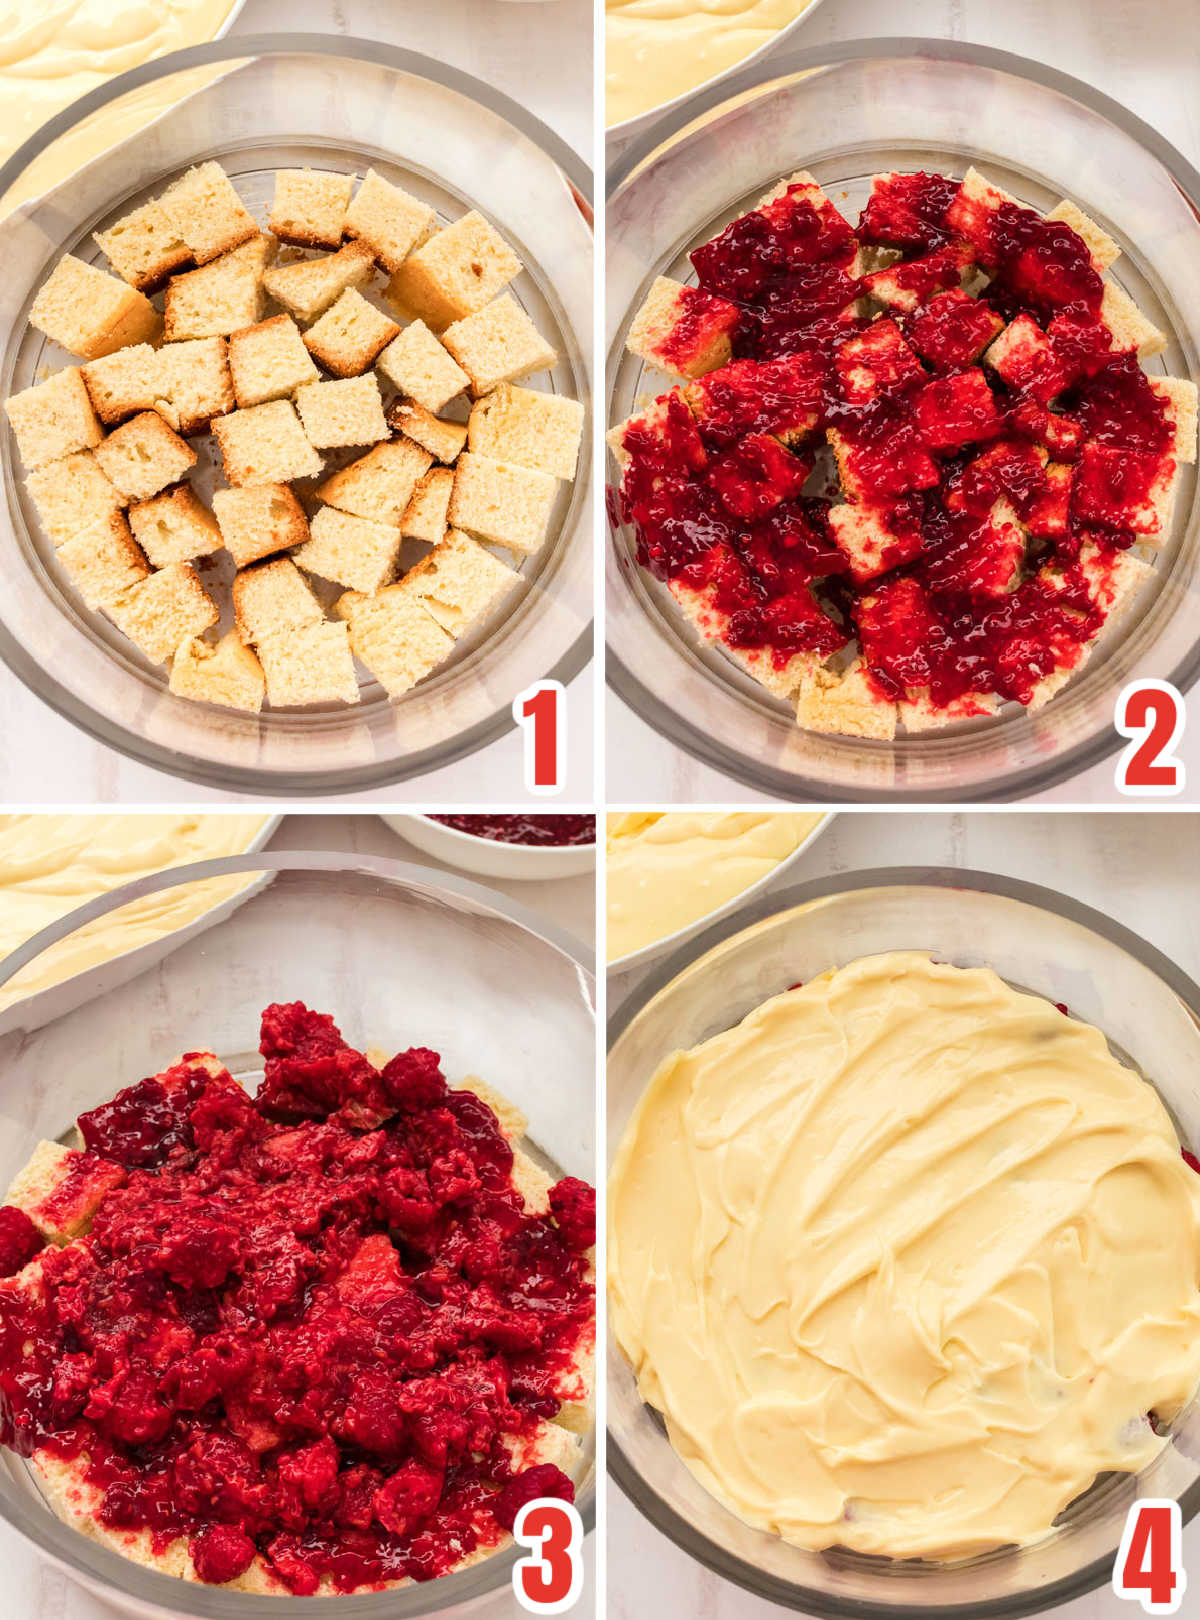 Collage image showing how to assemble the first few layers of the Trifle dessert.